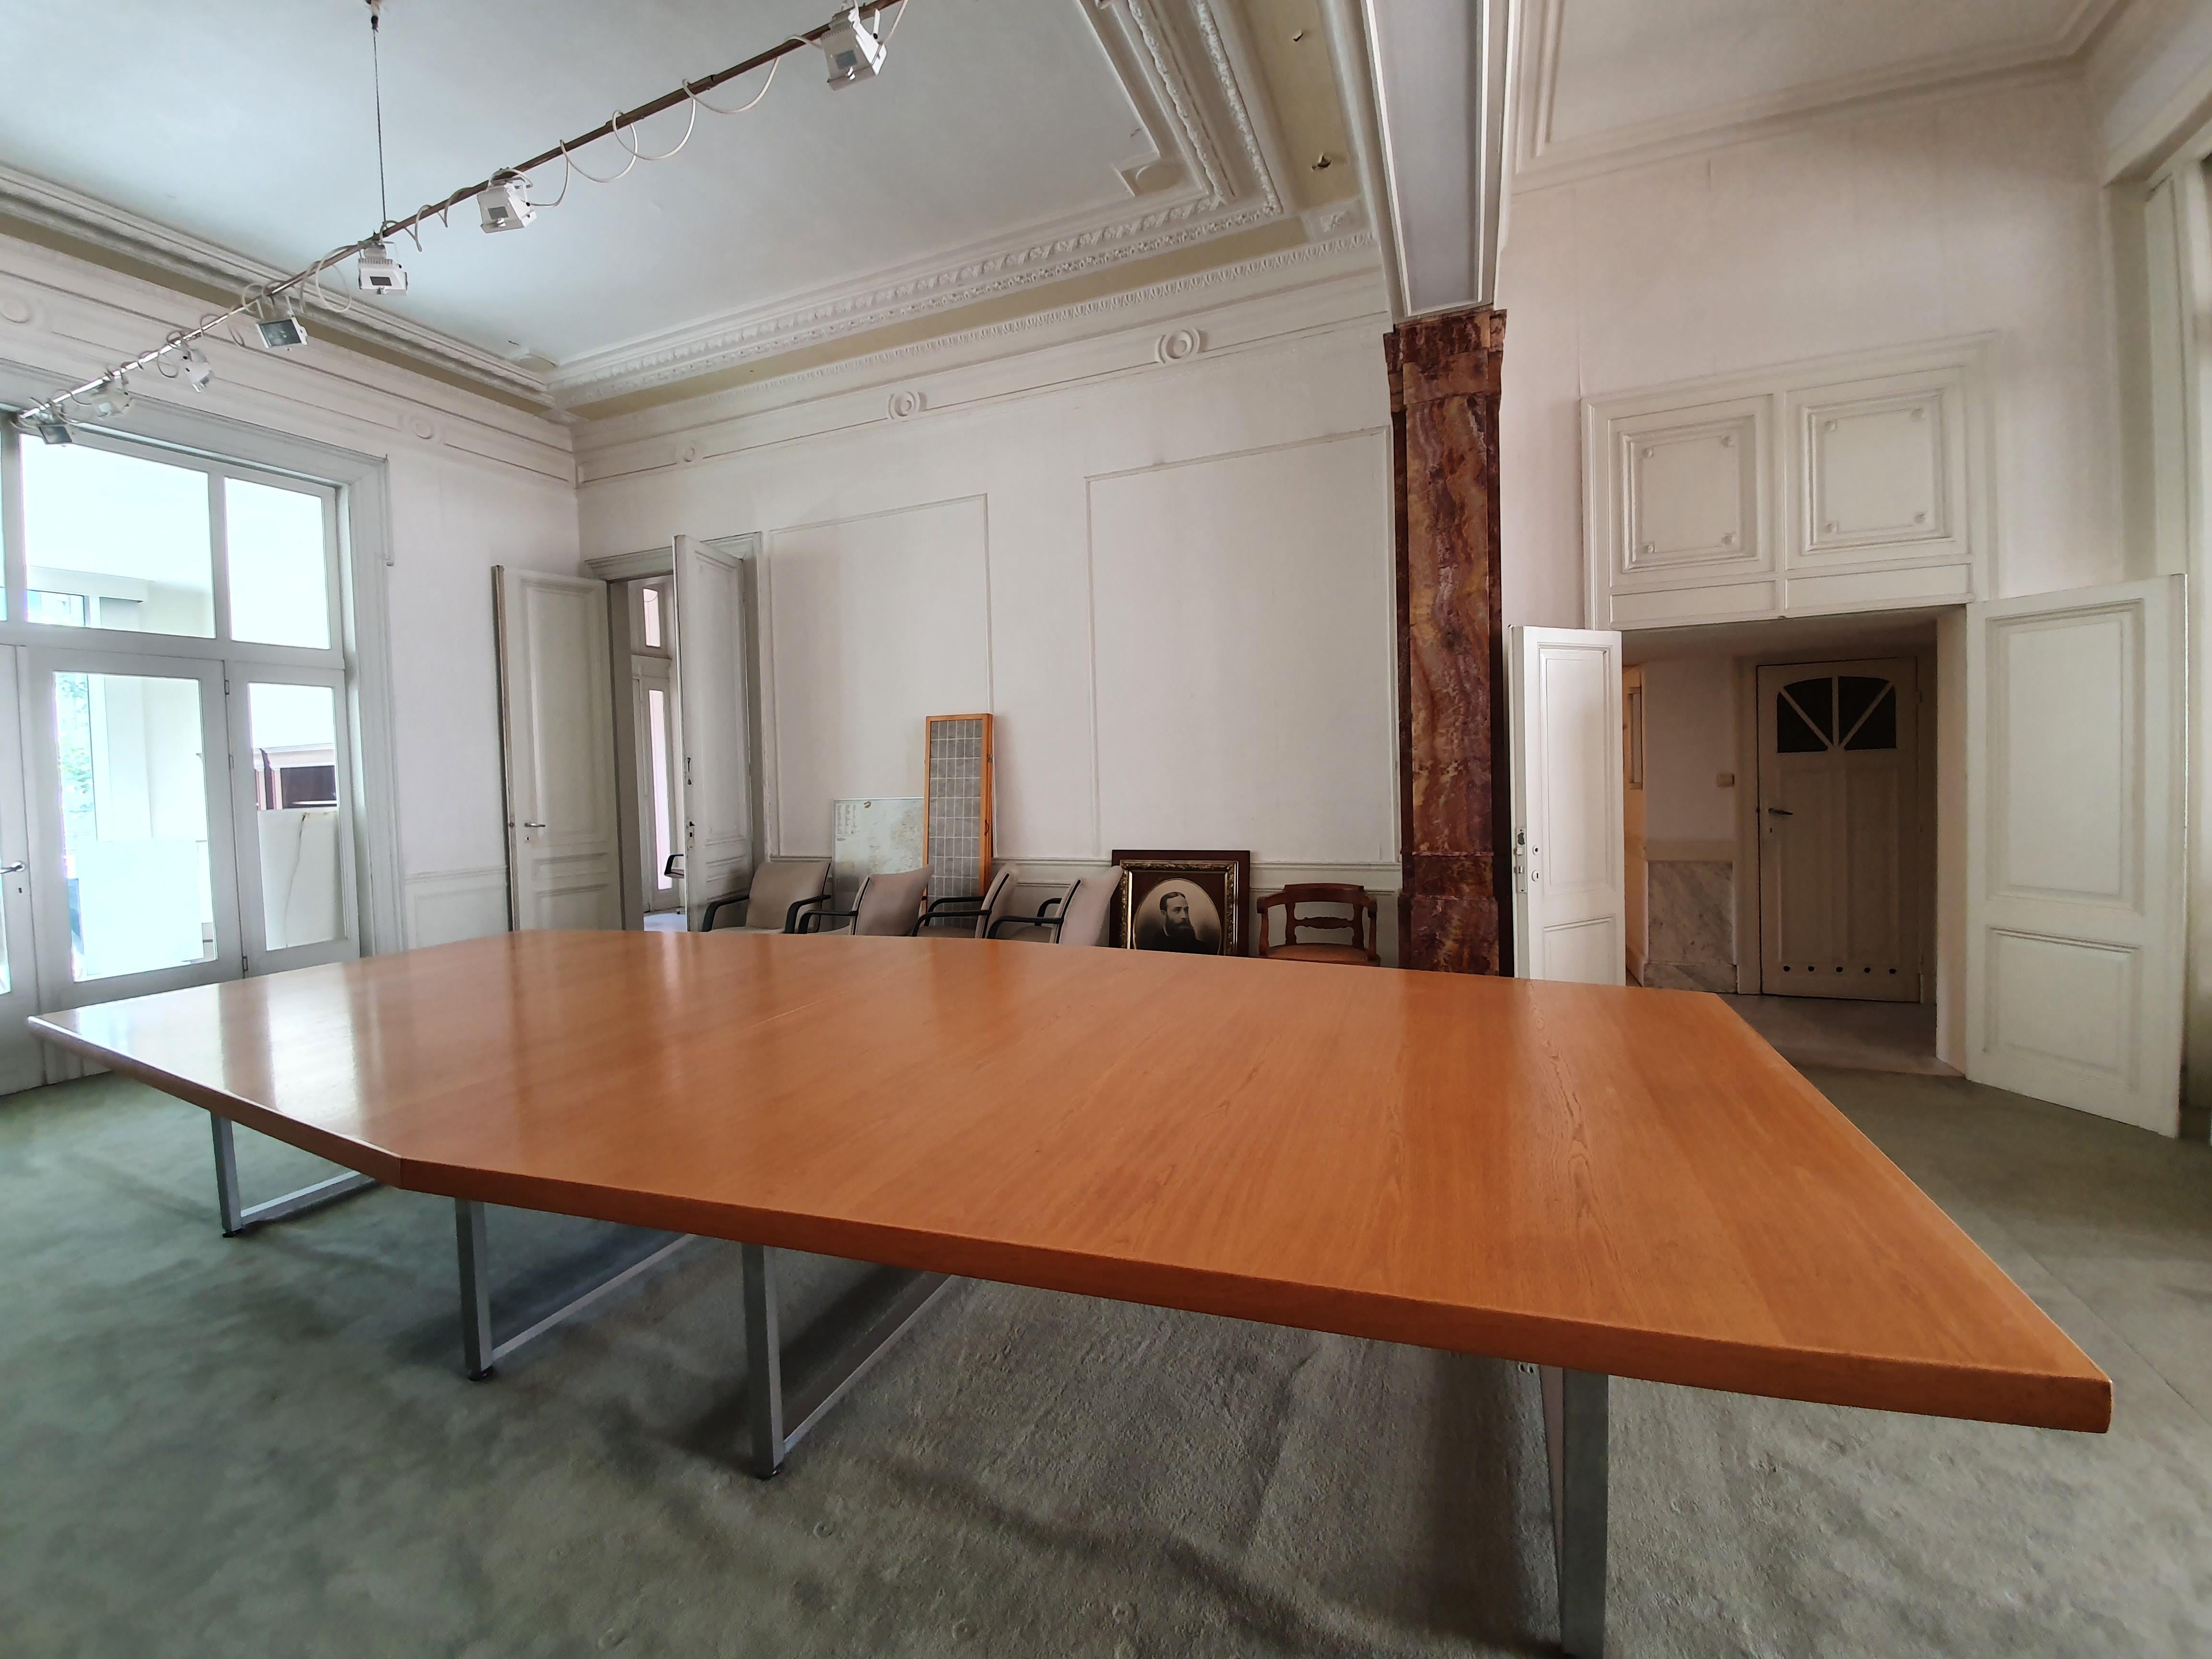 Chrome Large Conference Table by Froscher, 1970s Germany